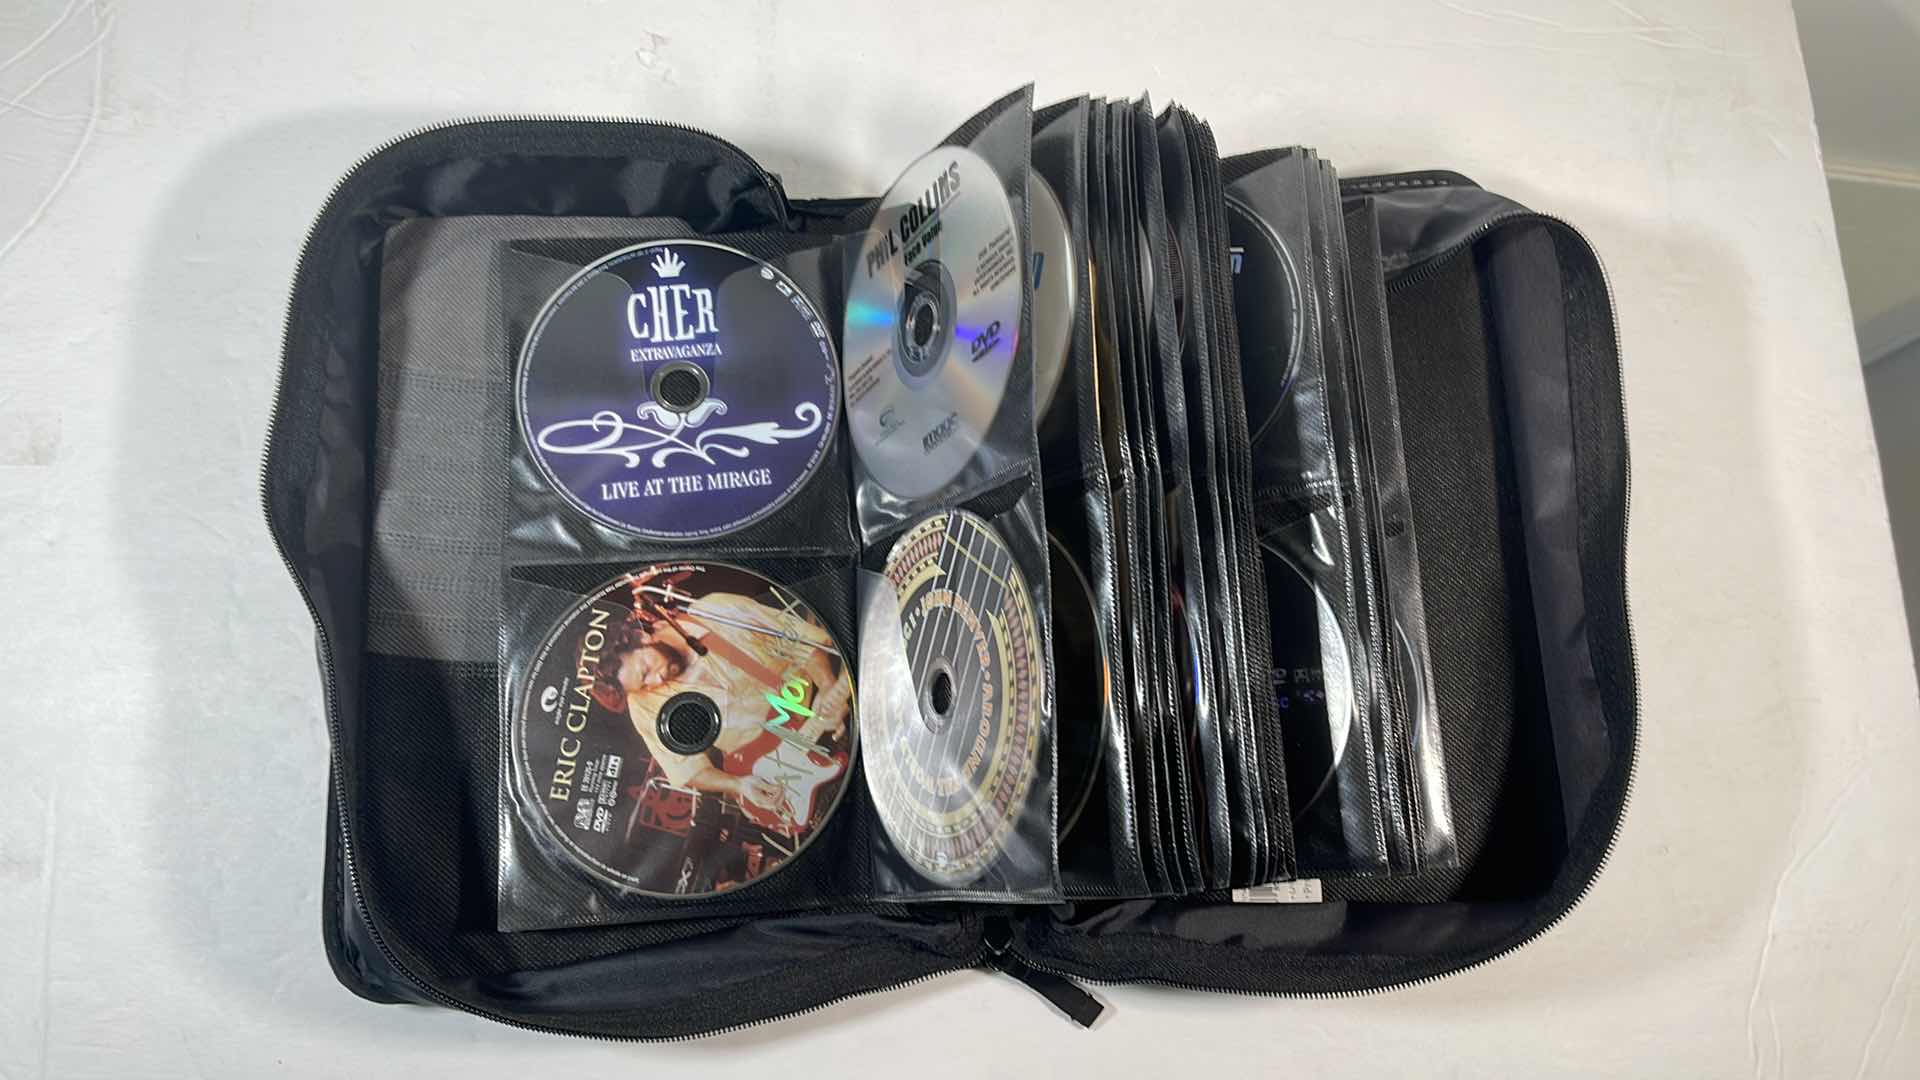 Photo 2 of CONCERT/VIDEO MUSIC CD/DVDS VARIOUS & CASE LOGIC CARRY CASE